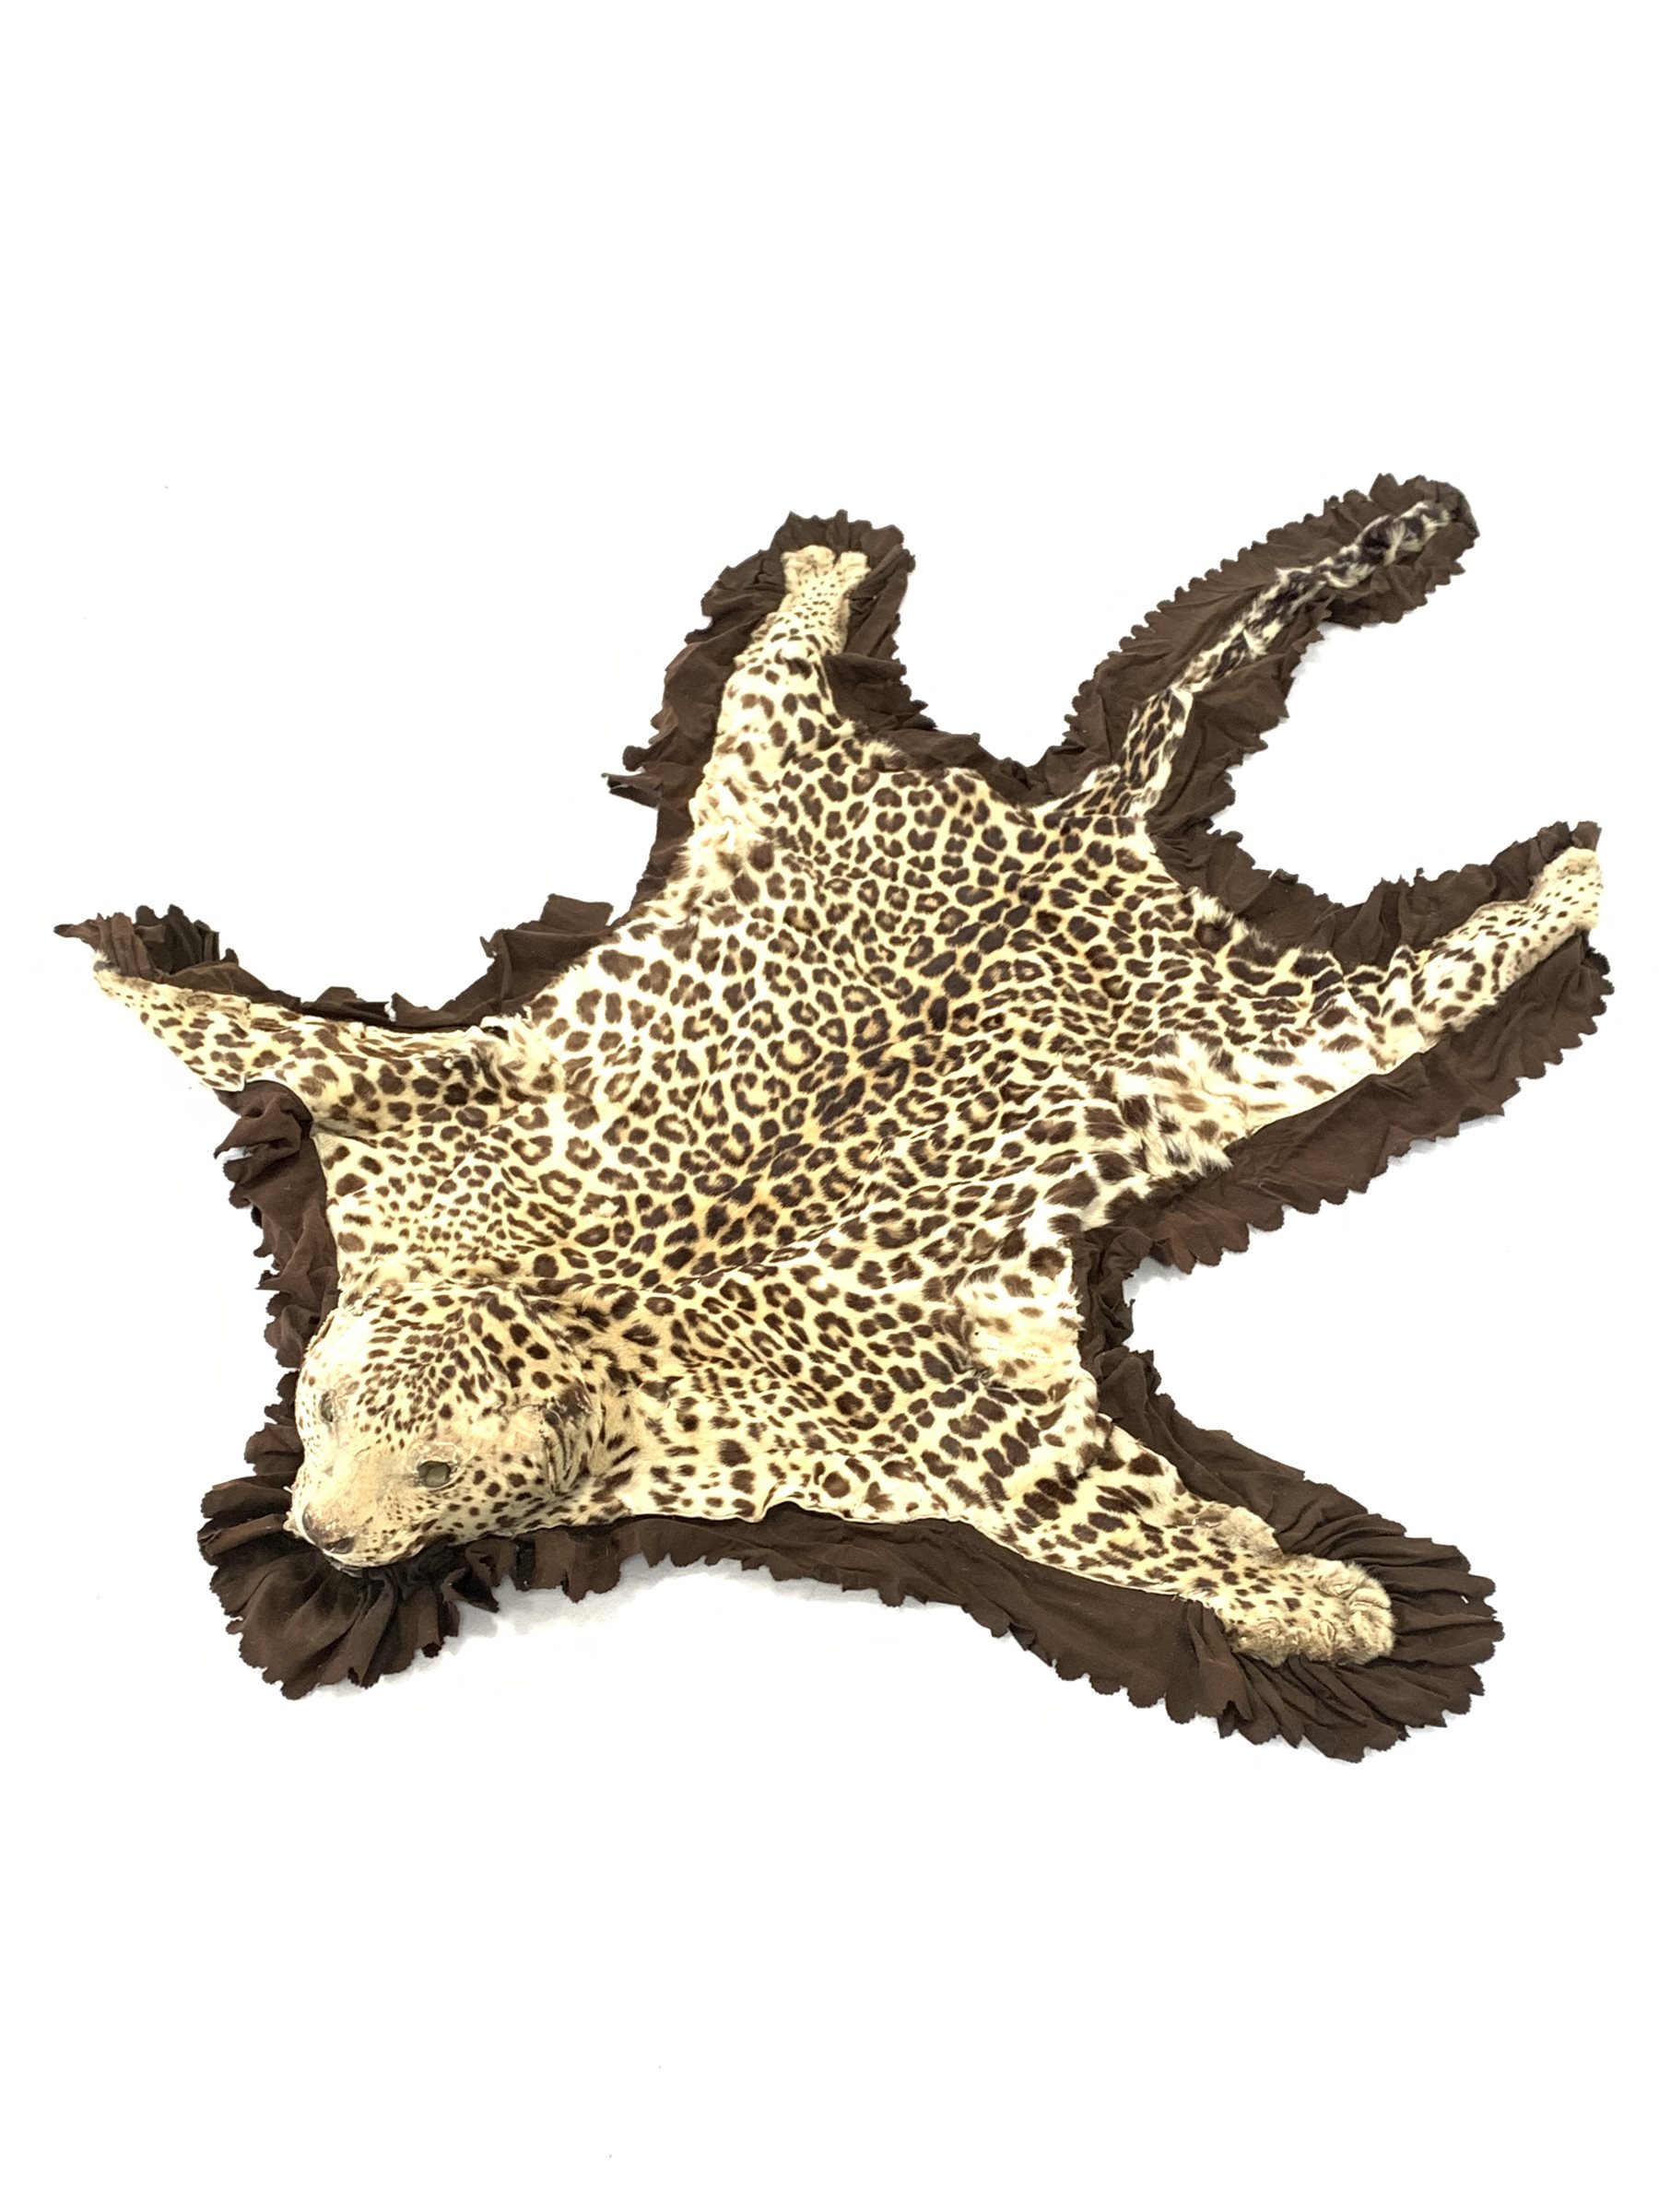 Taxidermy - Early 20th century Indian leopard skin rug (Panthera pardus) flat skin rug with head mou